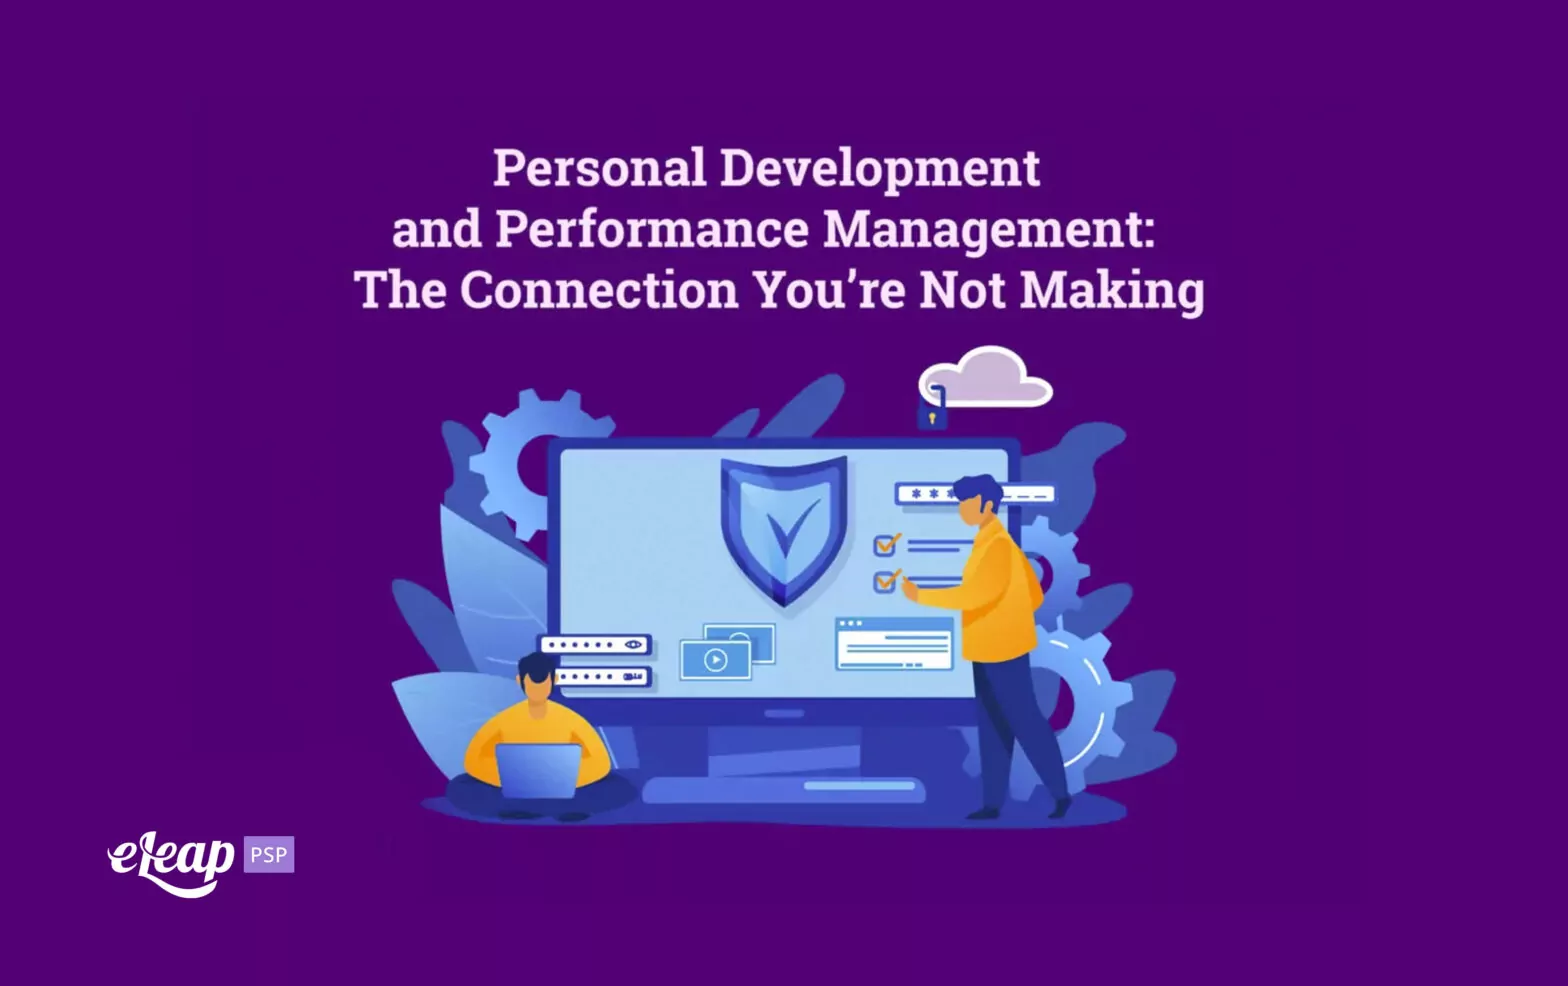 Personal Development and Performance Management: The Connection You’re Not Making